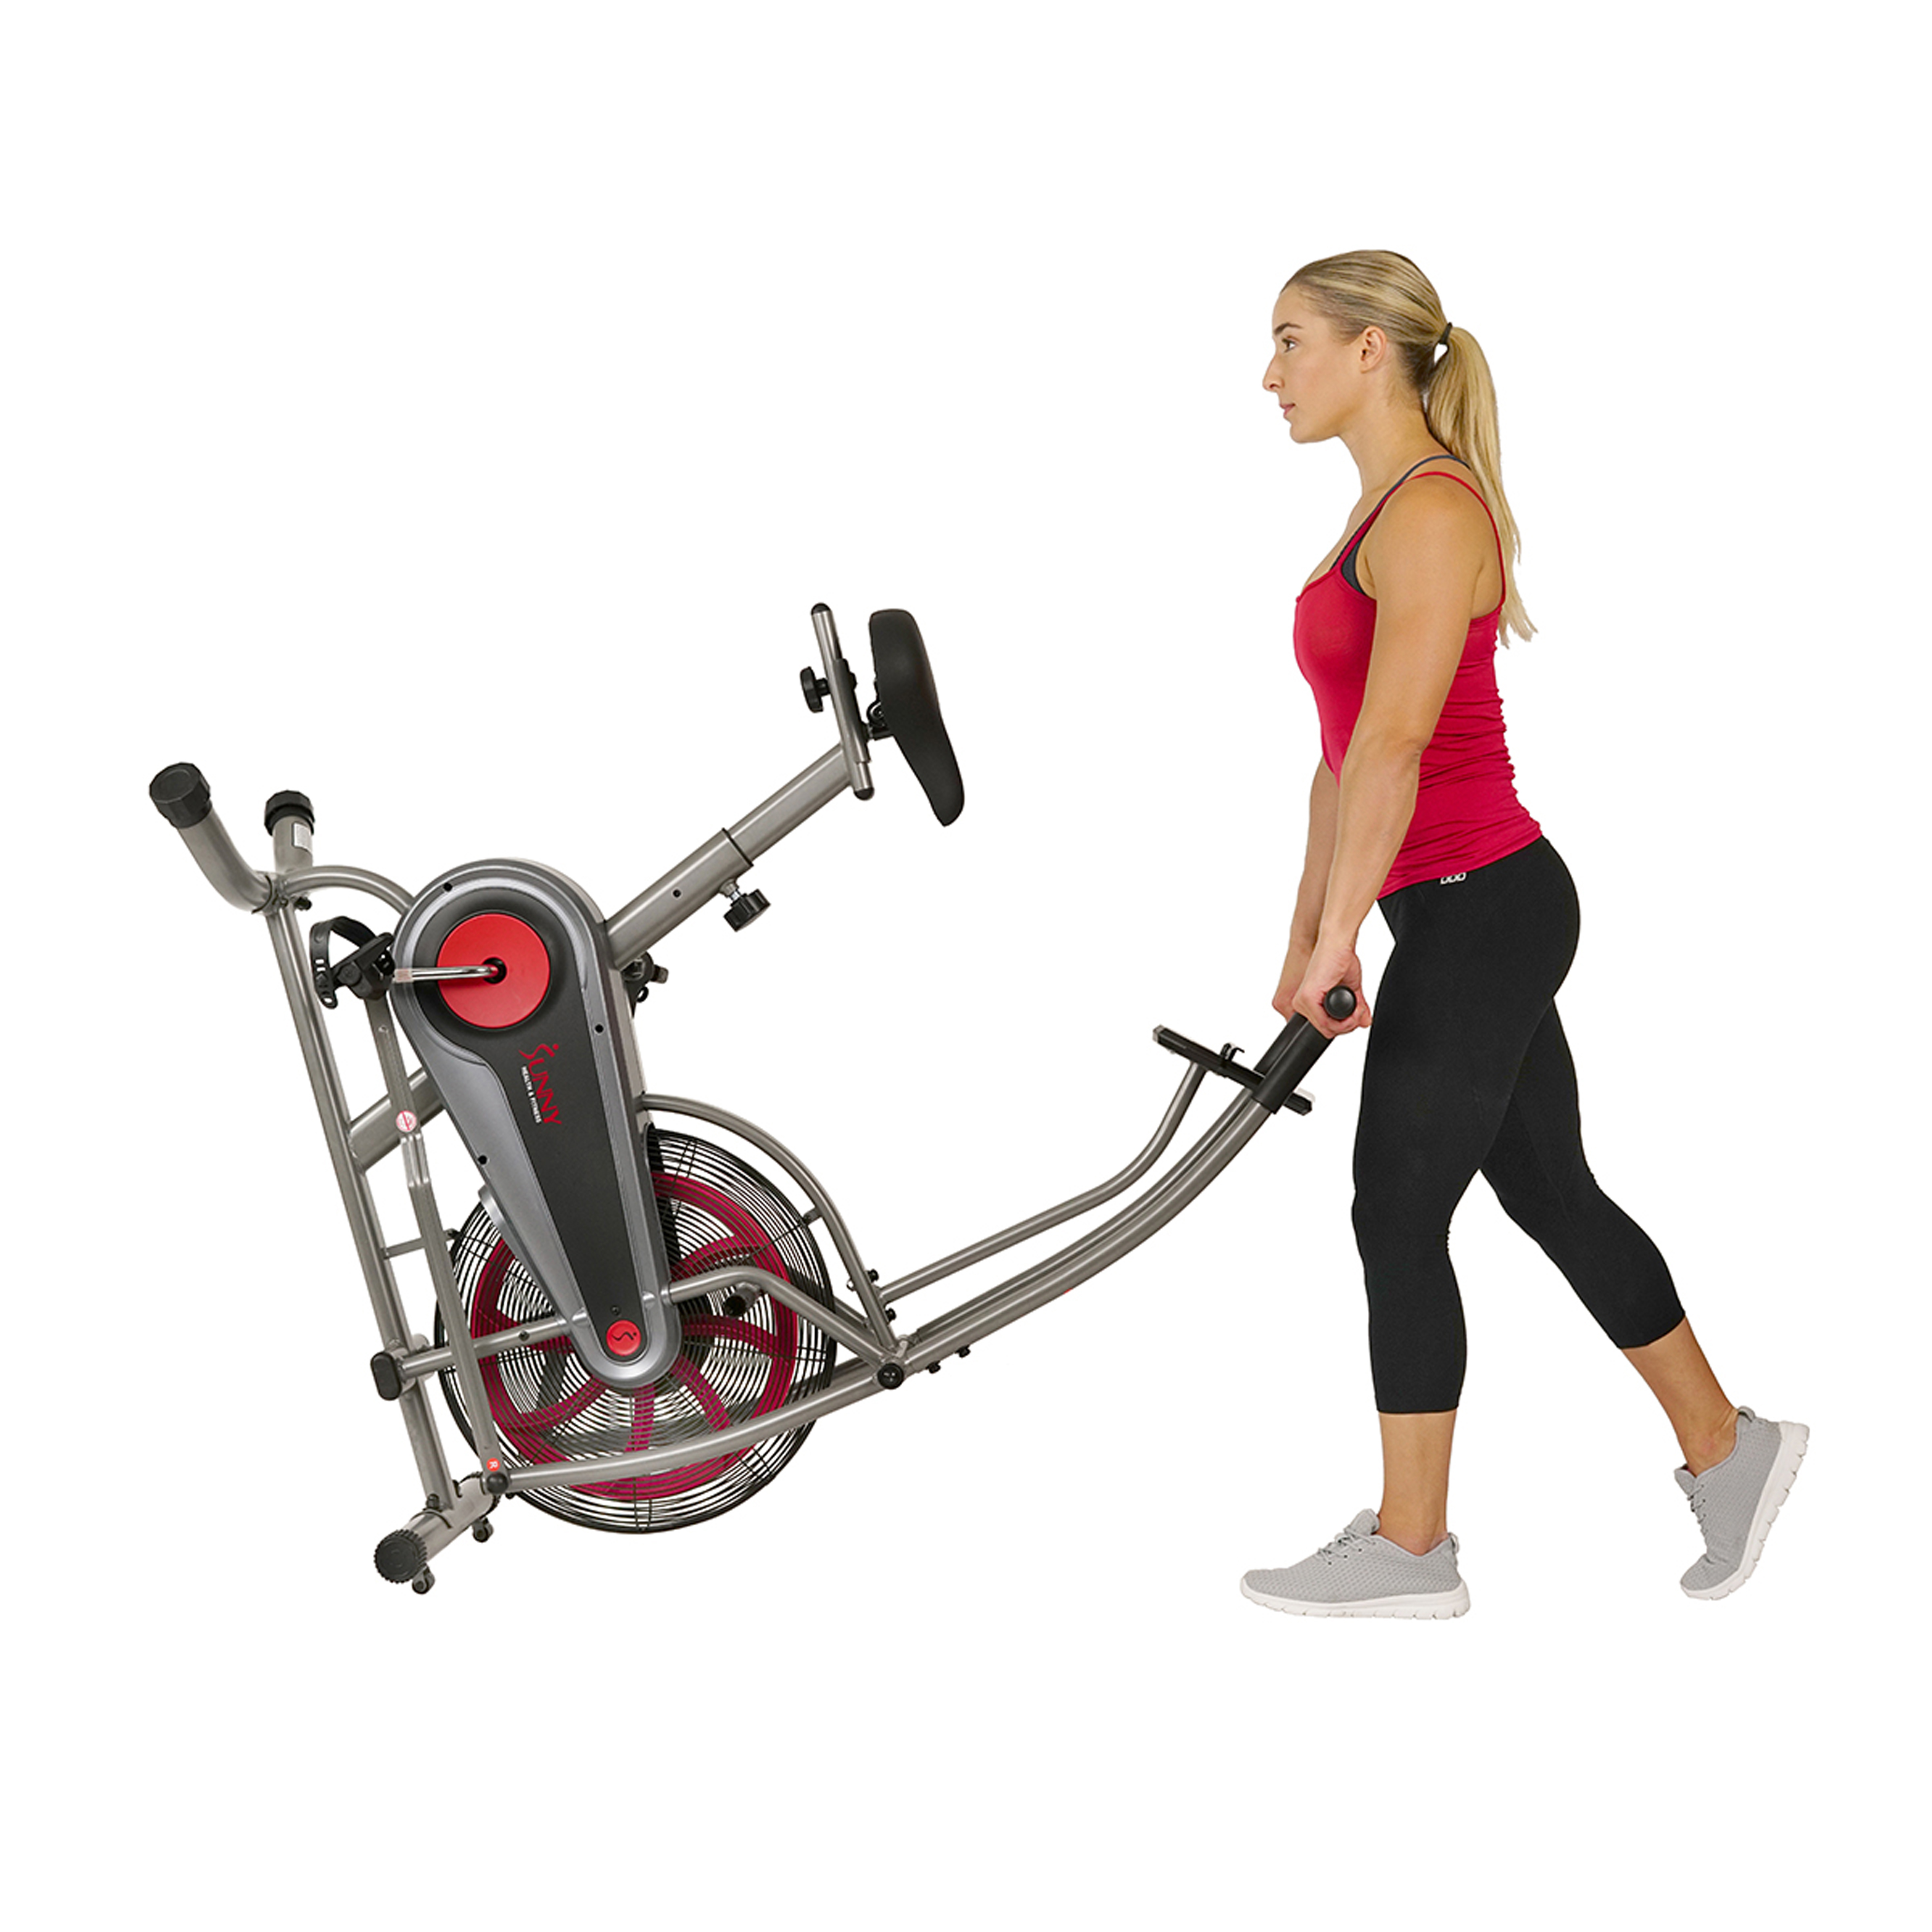 Sunny Health & Fitness Stationary Motion Fan Air Bike Exercise Machine, Indoor Home Cycling Trainer Static Bicycle, SF-B2916 - image 8 of 8